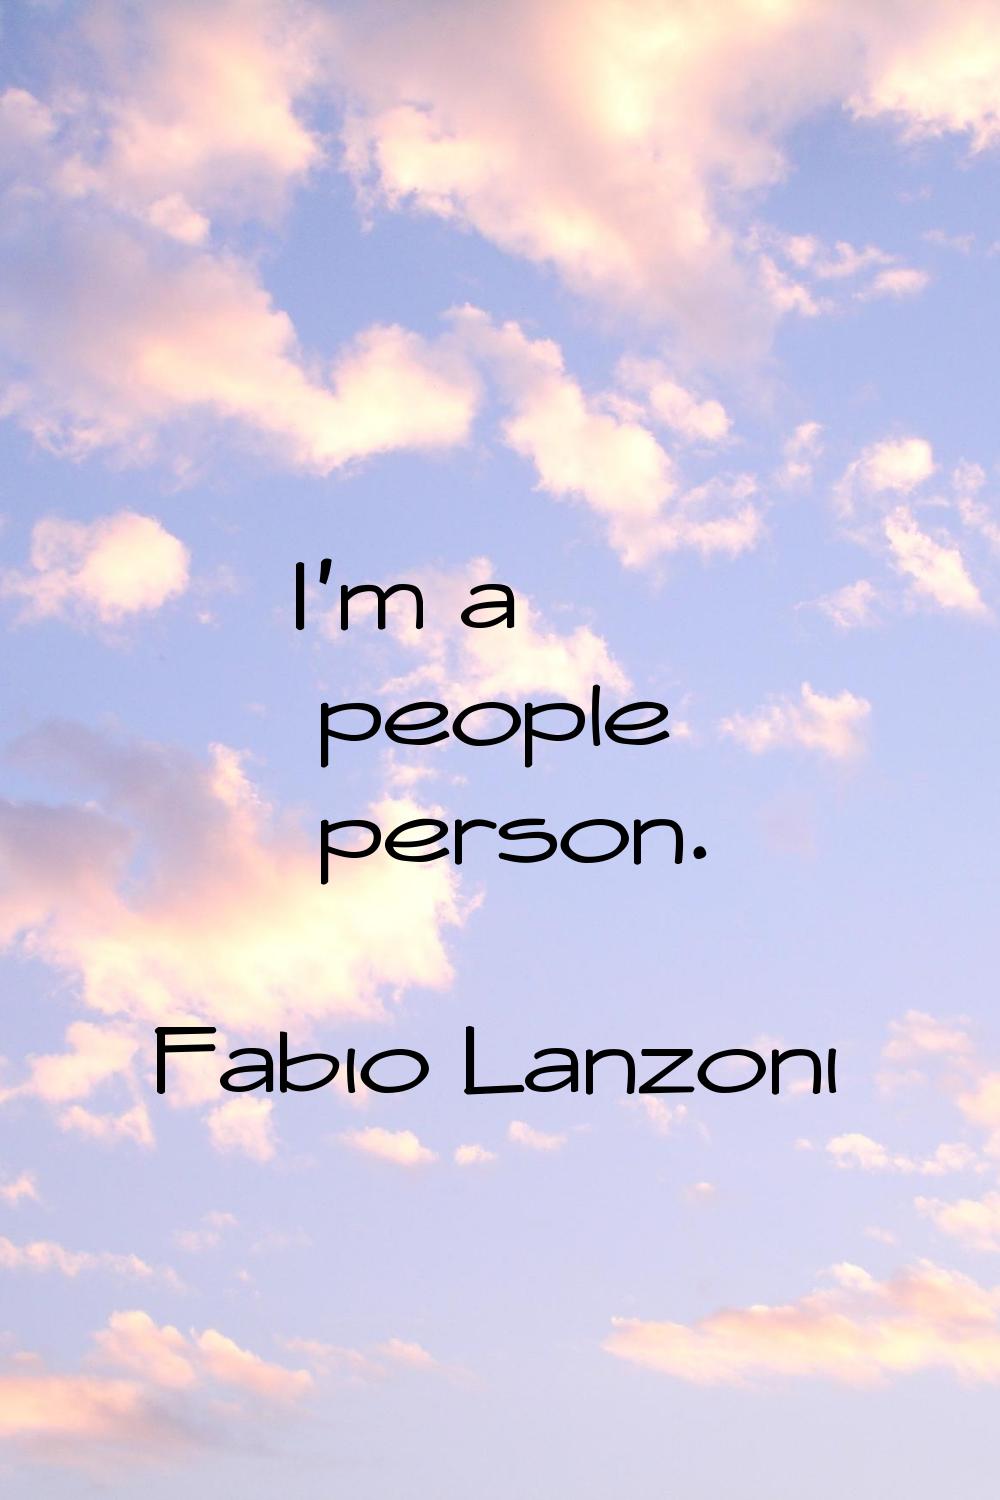 I'm a people person.